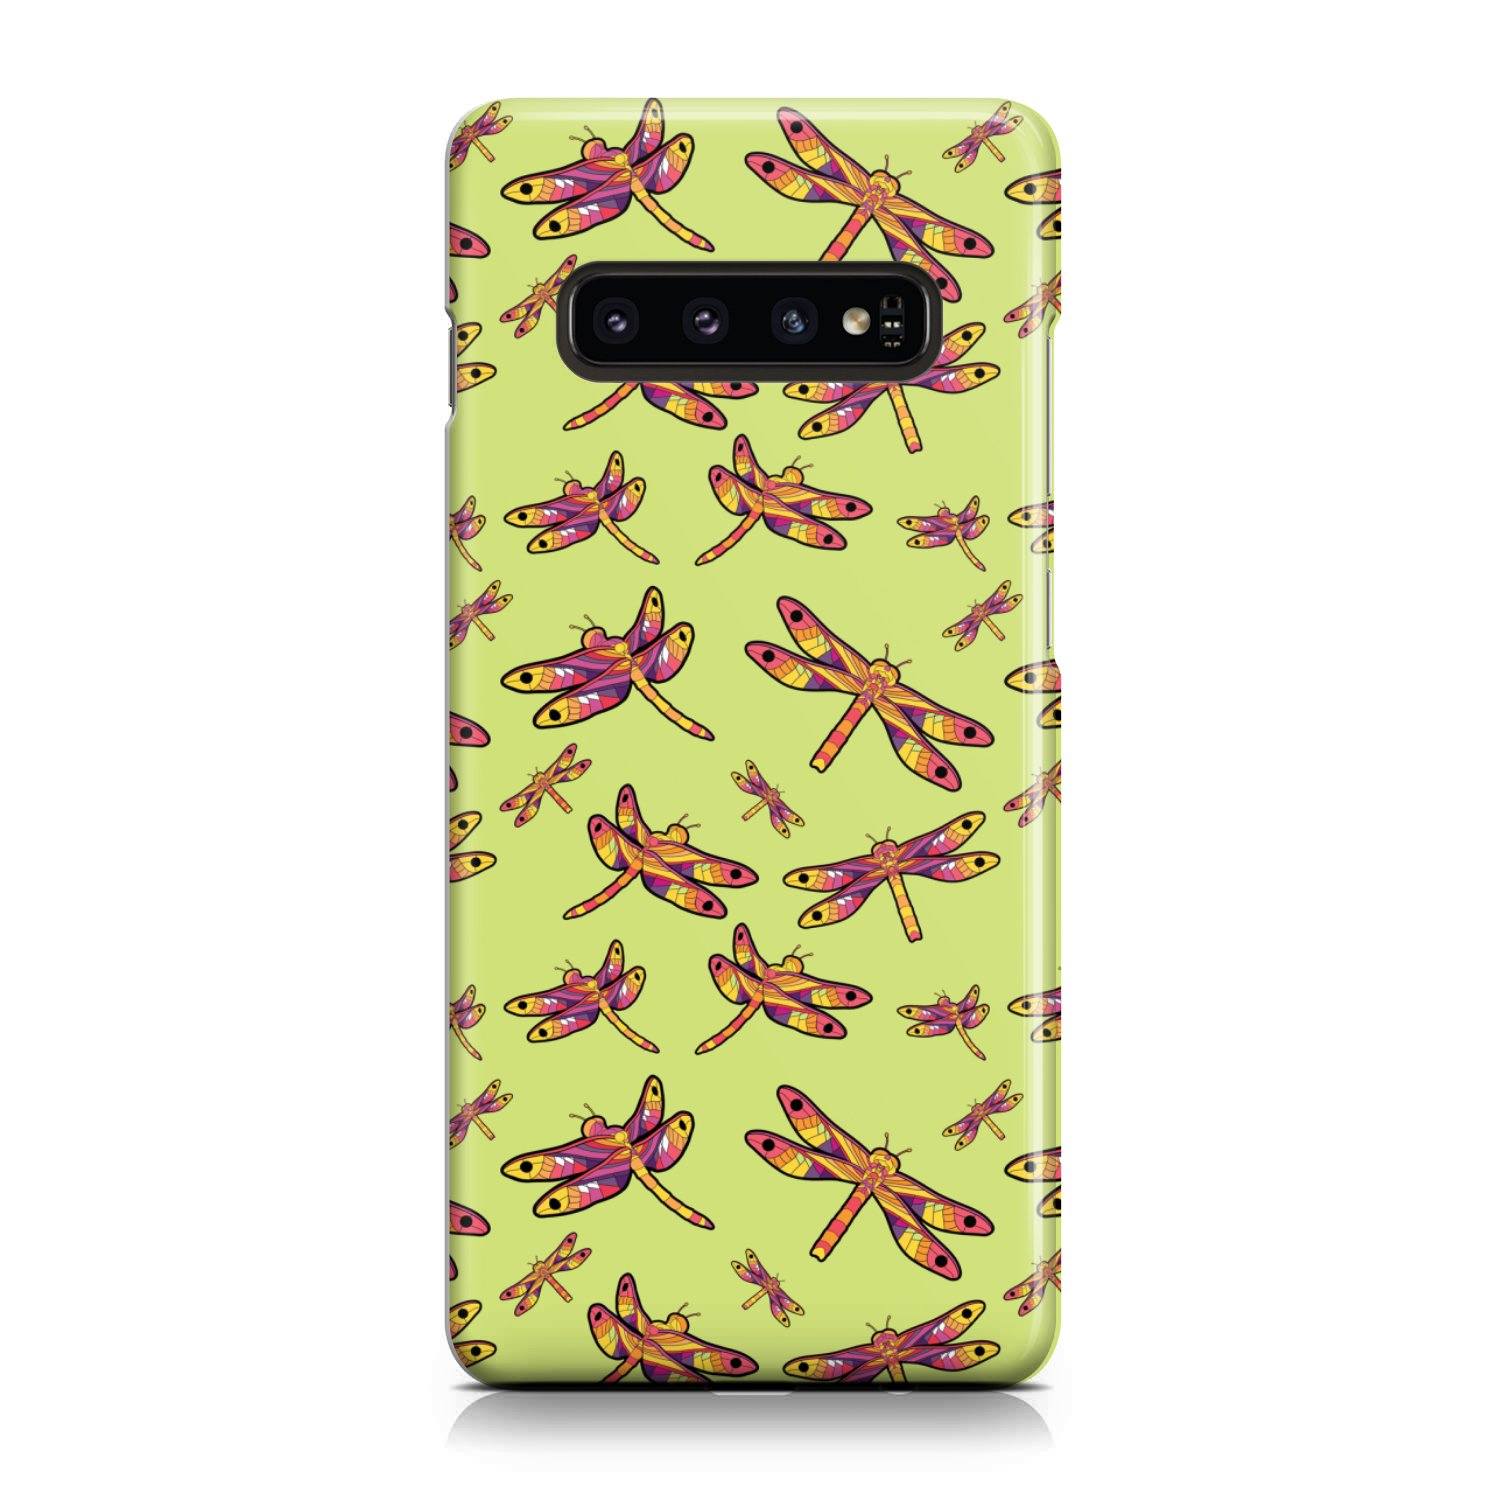 Gathering Lime Phone Case Phone Case wc-fulfillment Samsung Galaxy S10 Plus 